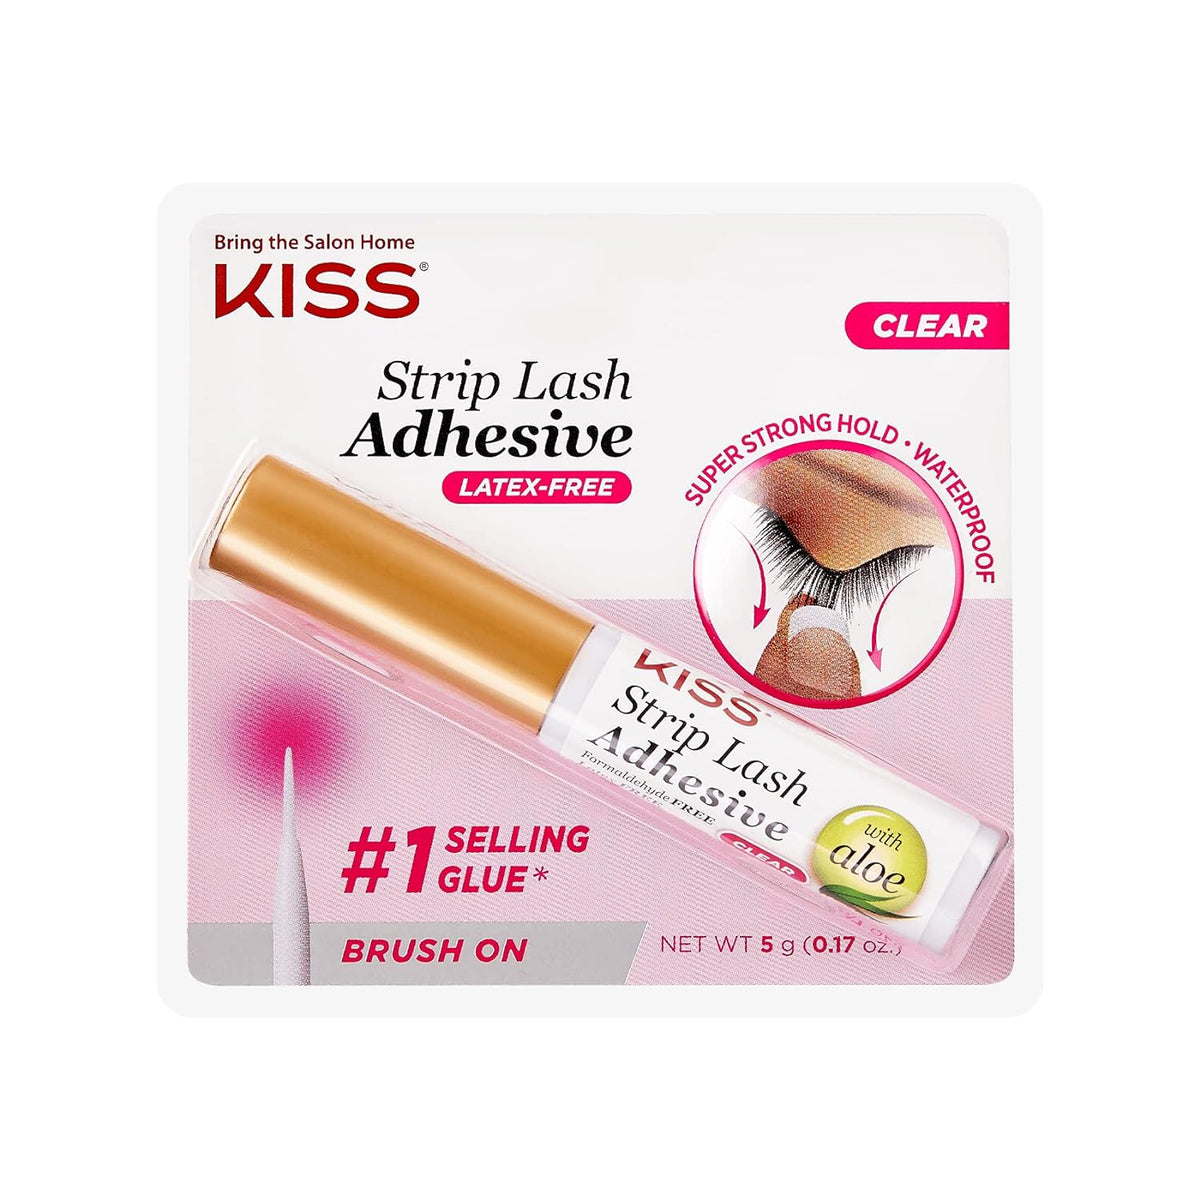 Strip Lash Adhesive, Lash Glue, 24Hr Strip Eyelash Adhesive, Clear, Includes Lash Adhesive, Long Lasting Wear, Can Be Used with Strip Lashes and Lash Clusters